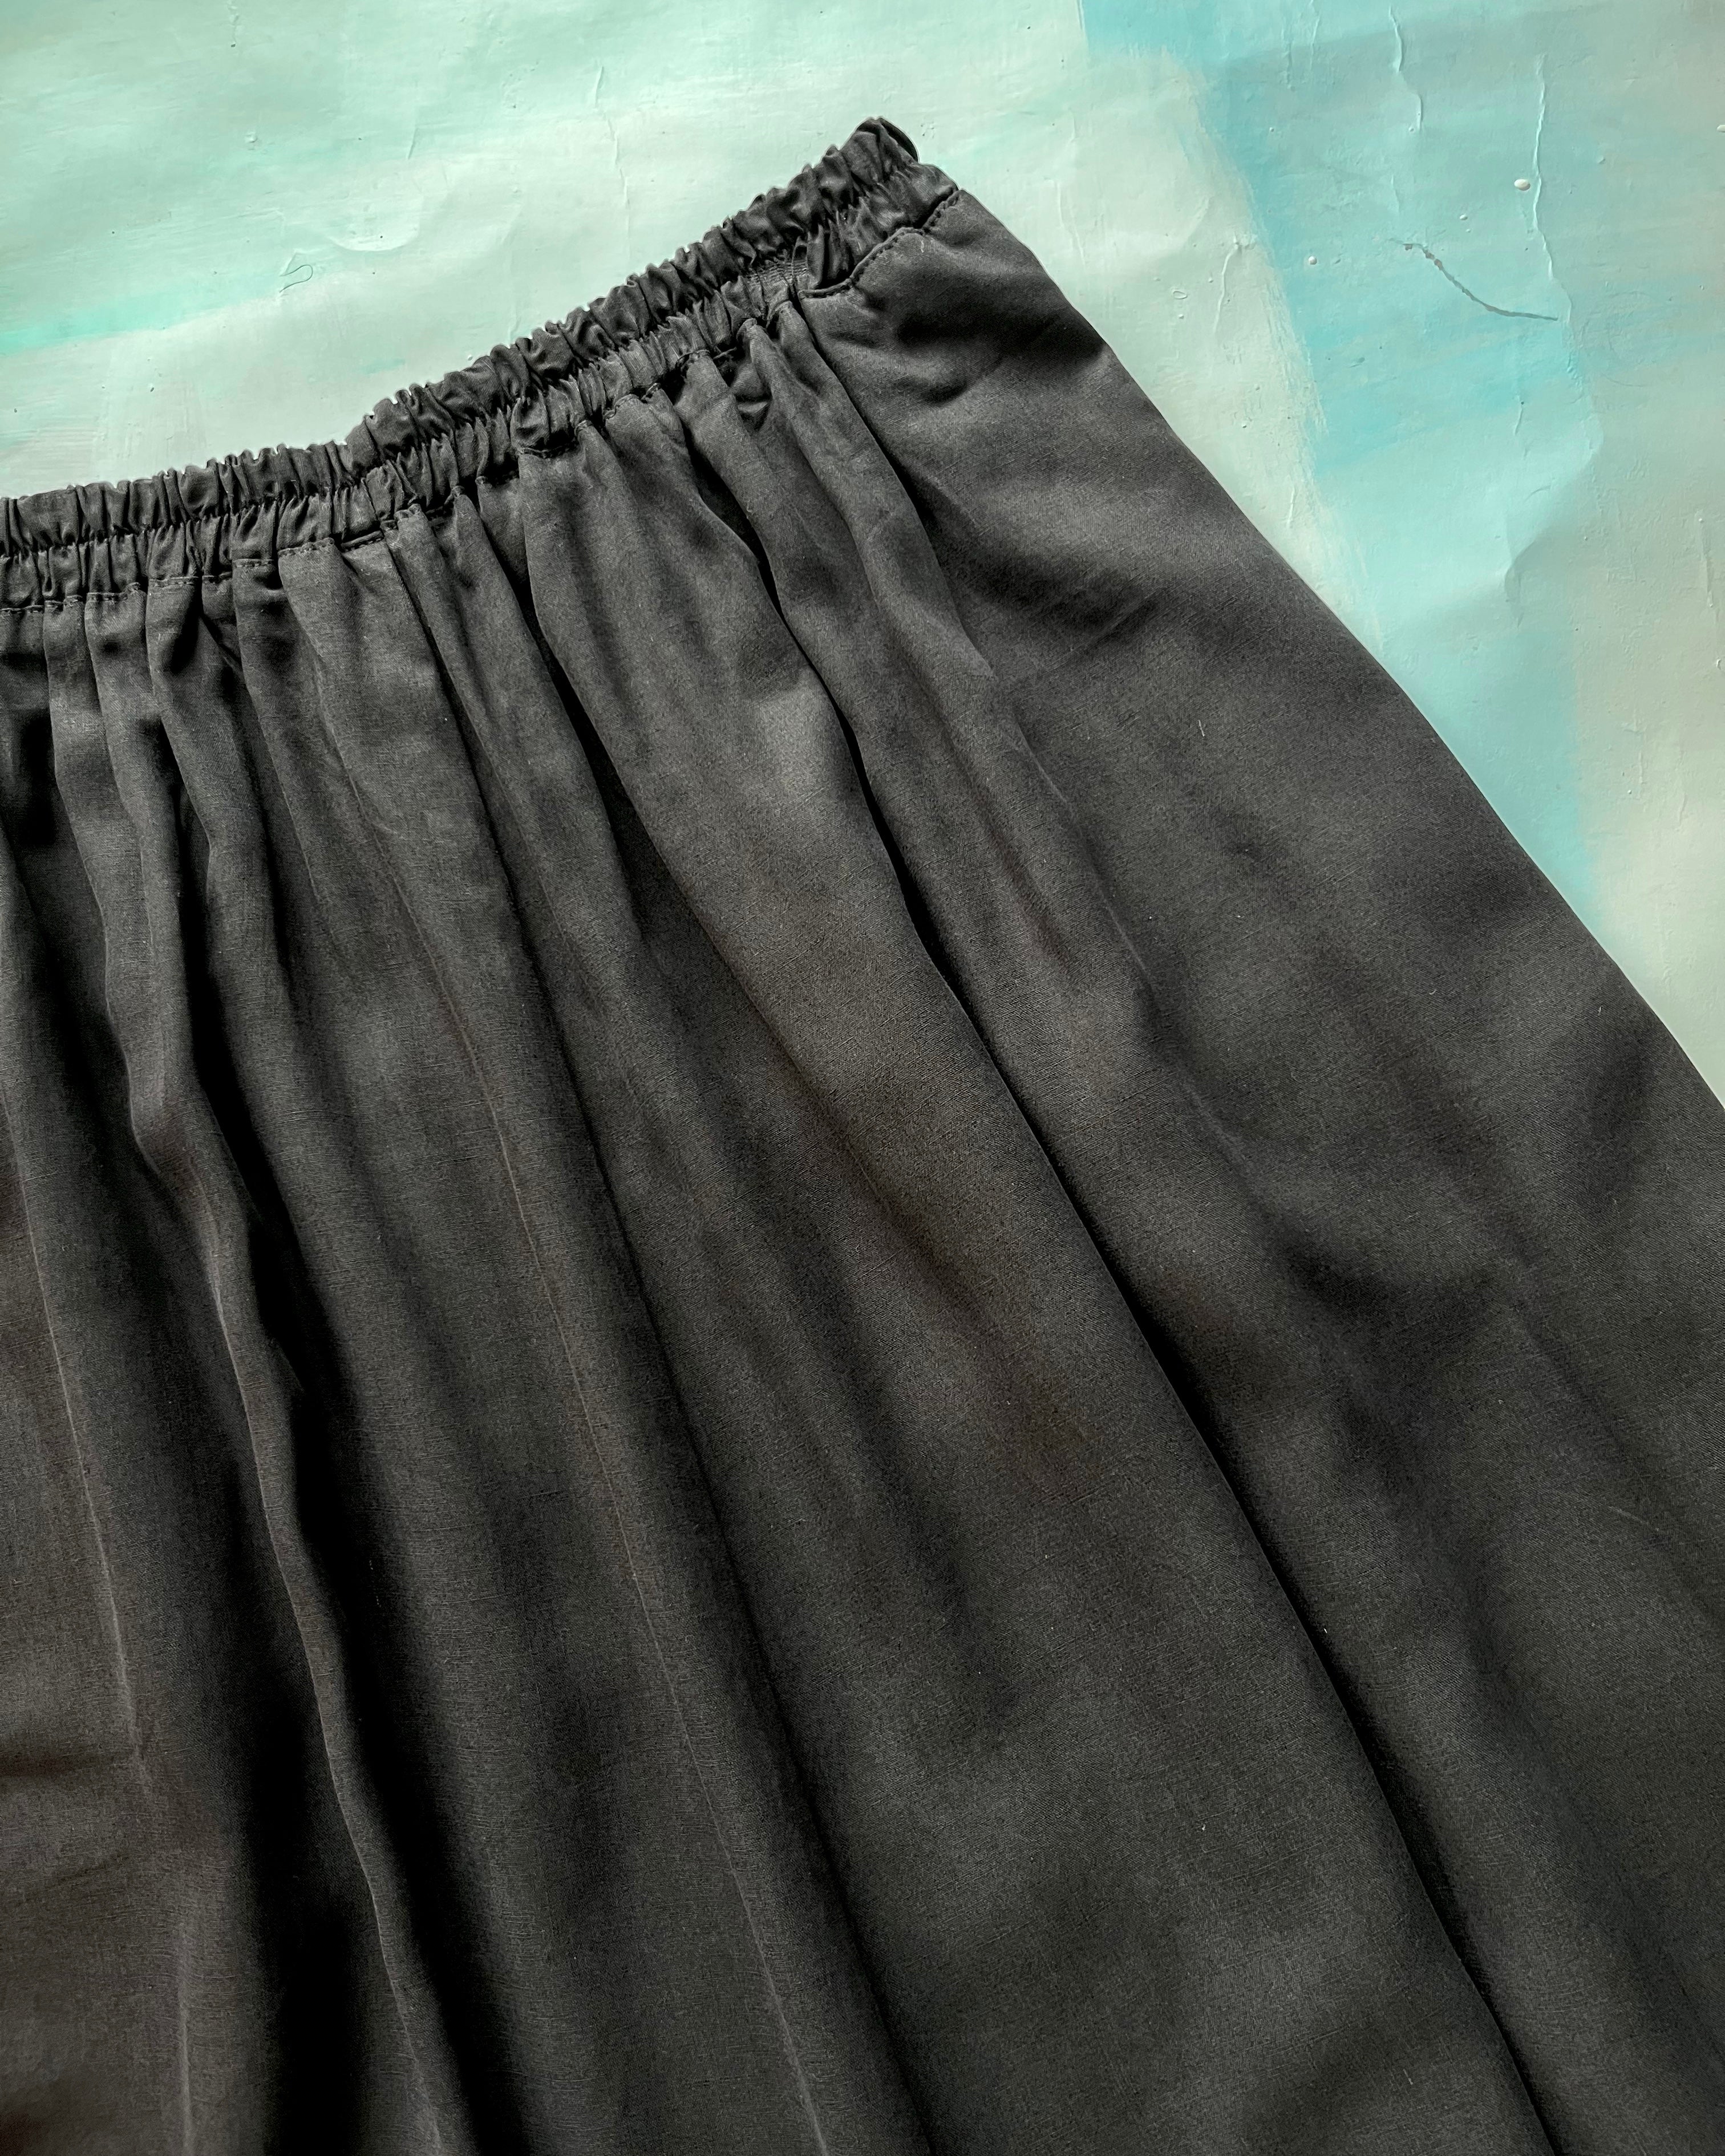 Connie Maxi Skirt Black LOW STOCK